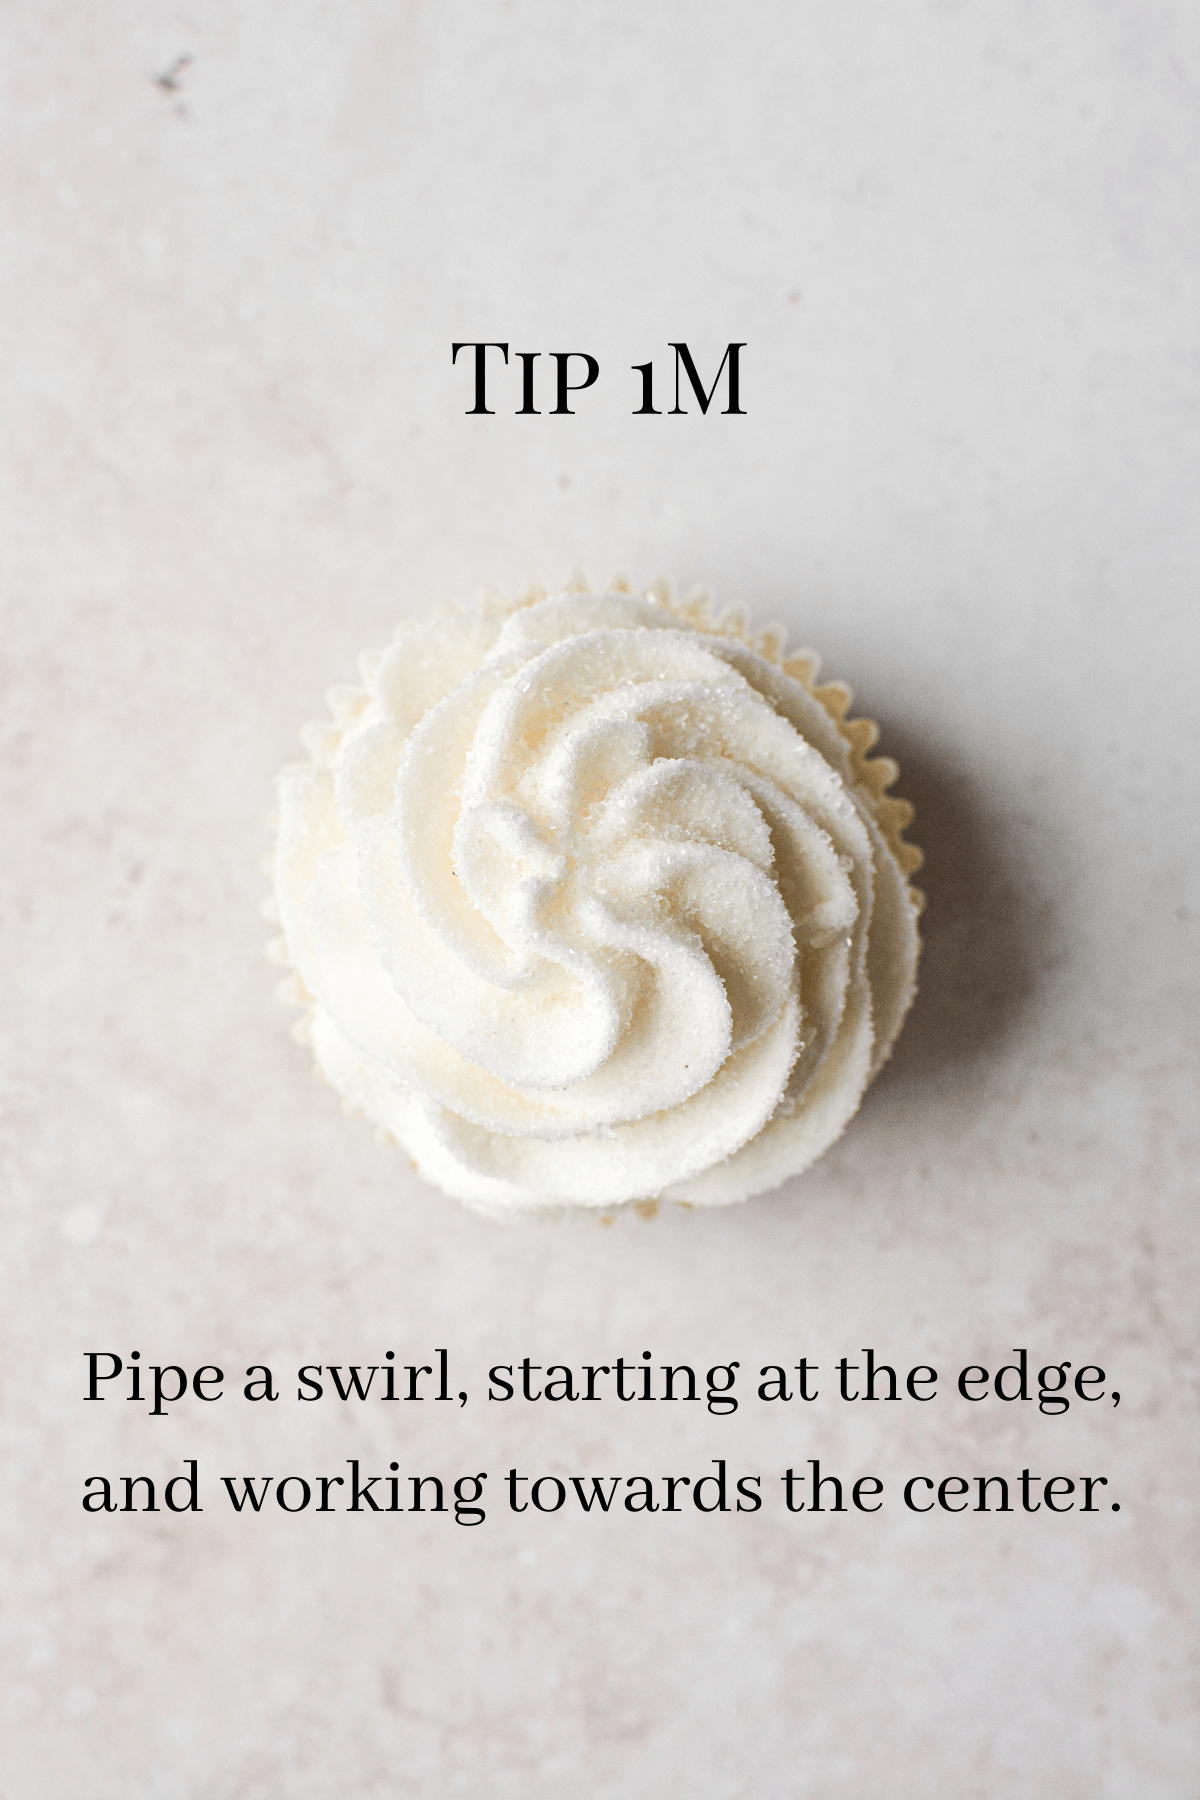 A graphic showing how to use tip 1M to pipe buttercream onto a lemon cupcake.